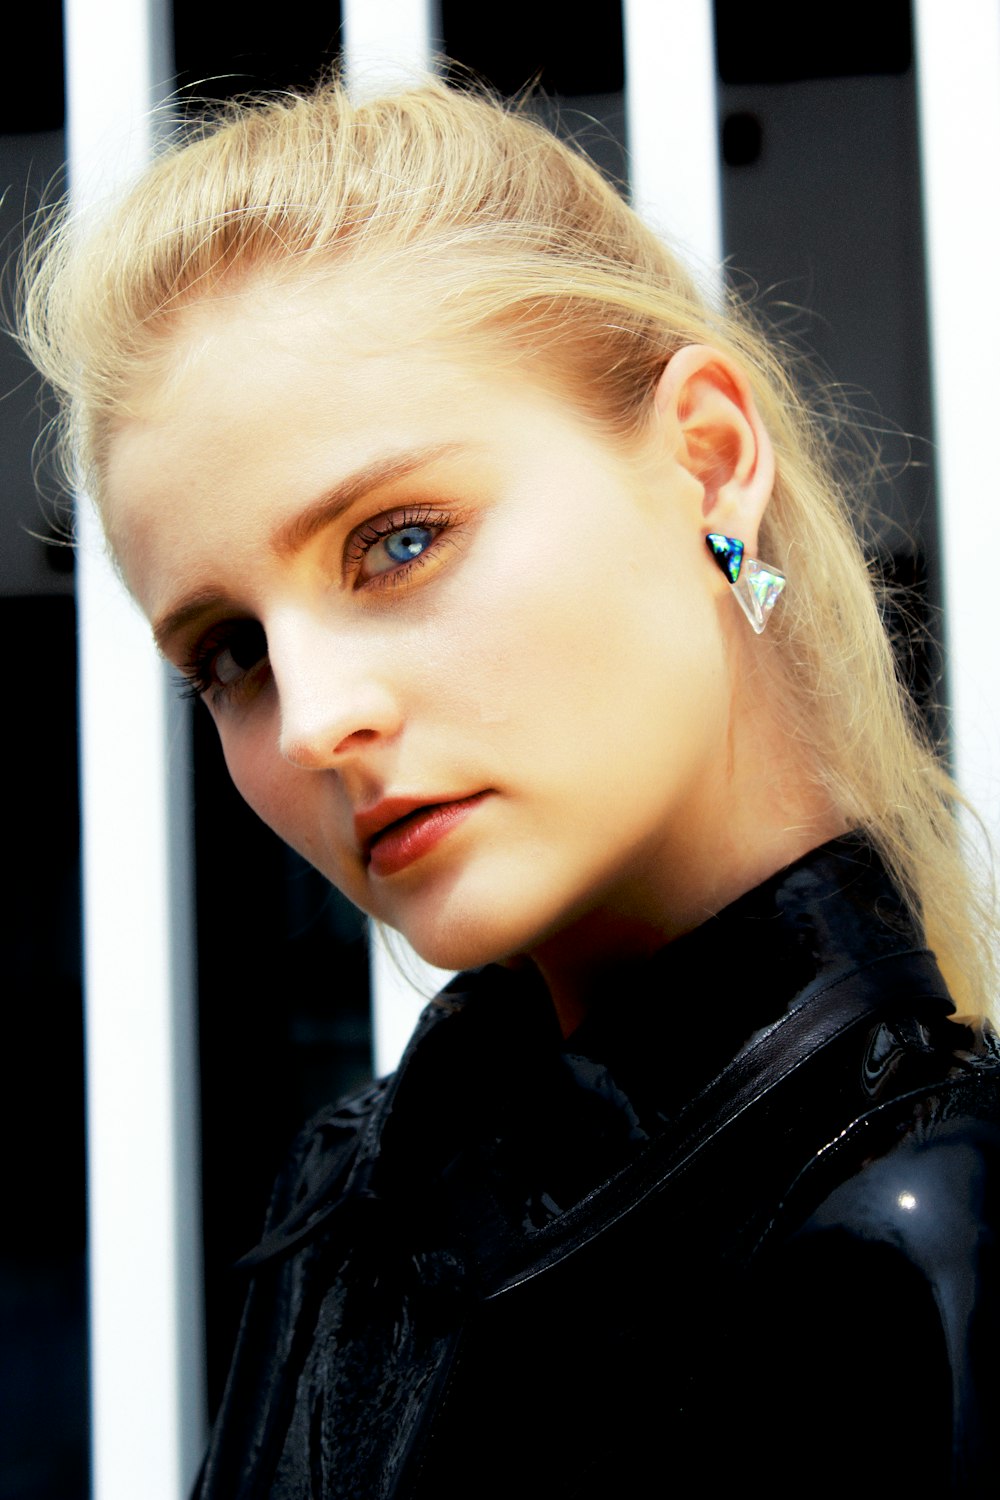 a woman with blue eyes wearing a black jacket